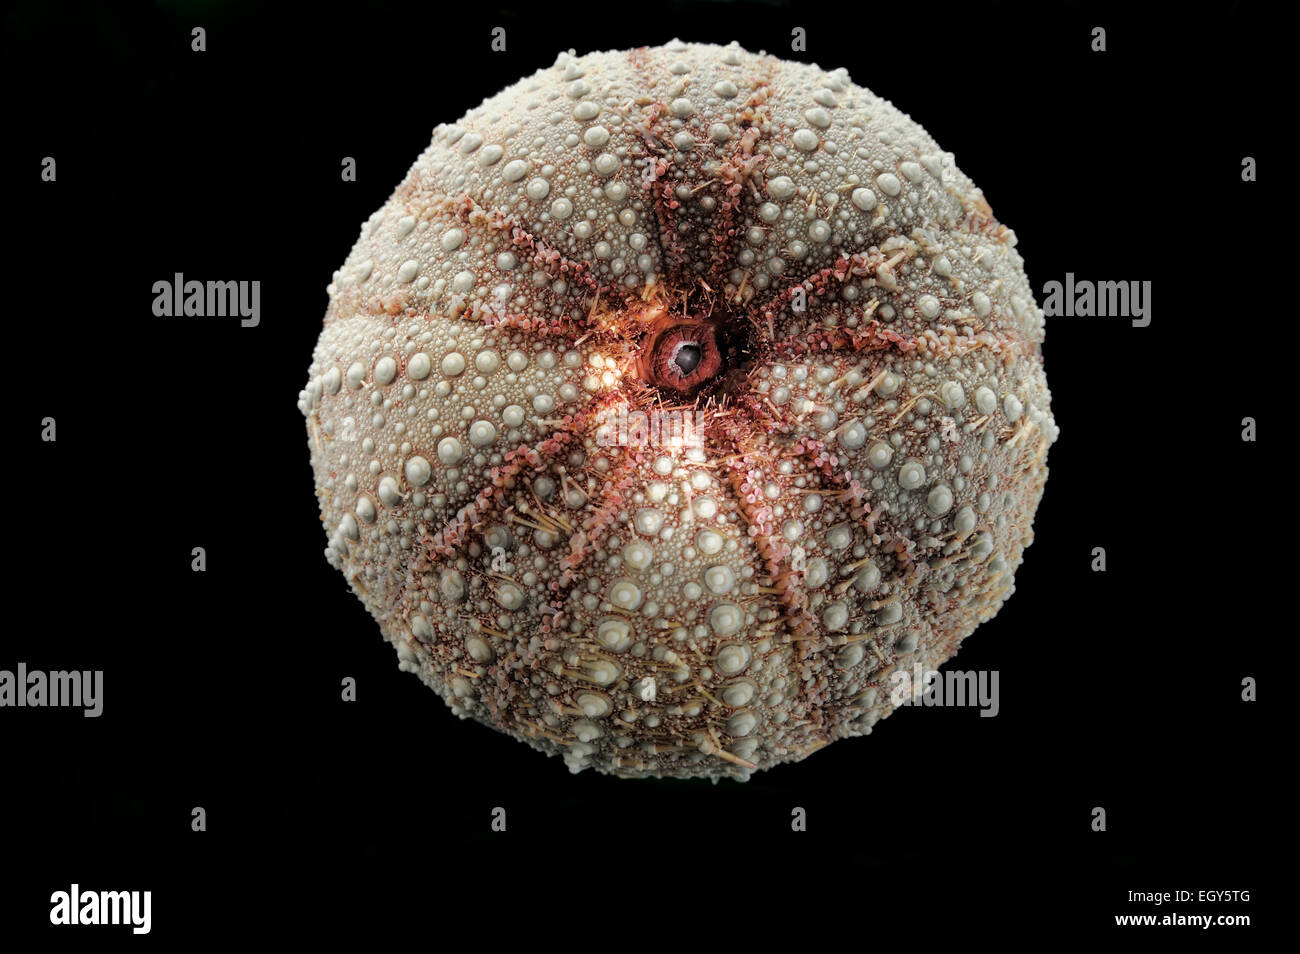 Sea Urchin (Dermechinus horridus) Picture was taken in cooperation with the Zoological Museum University of Hamburg | Seeigel (D Stock Photo